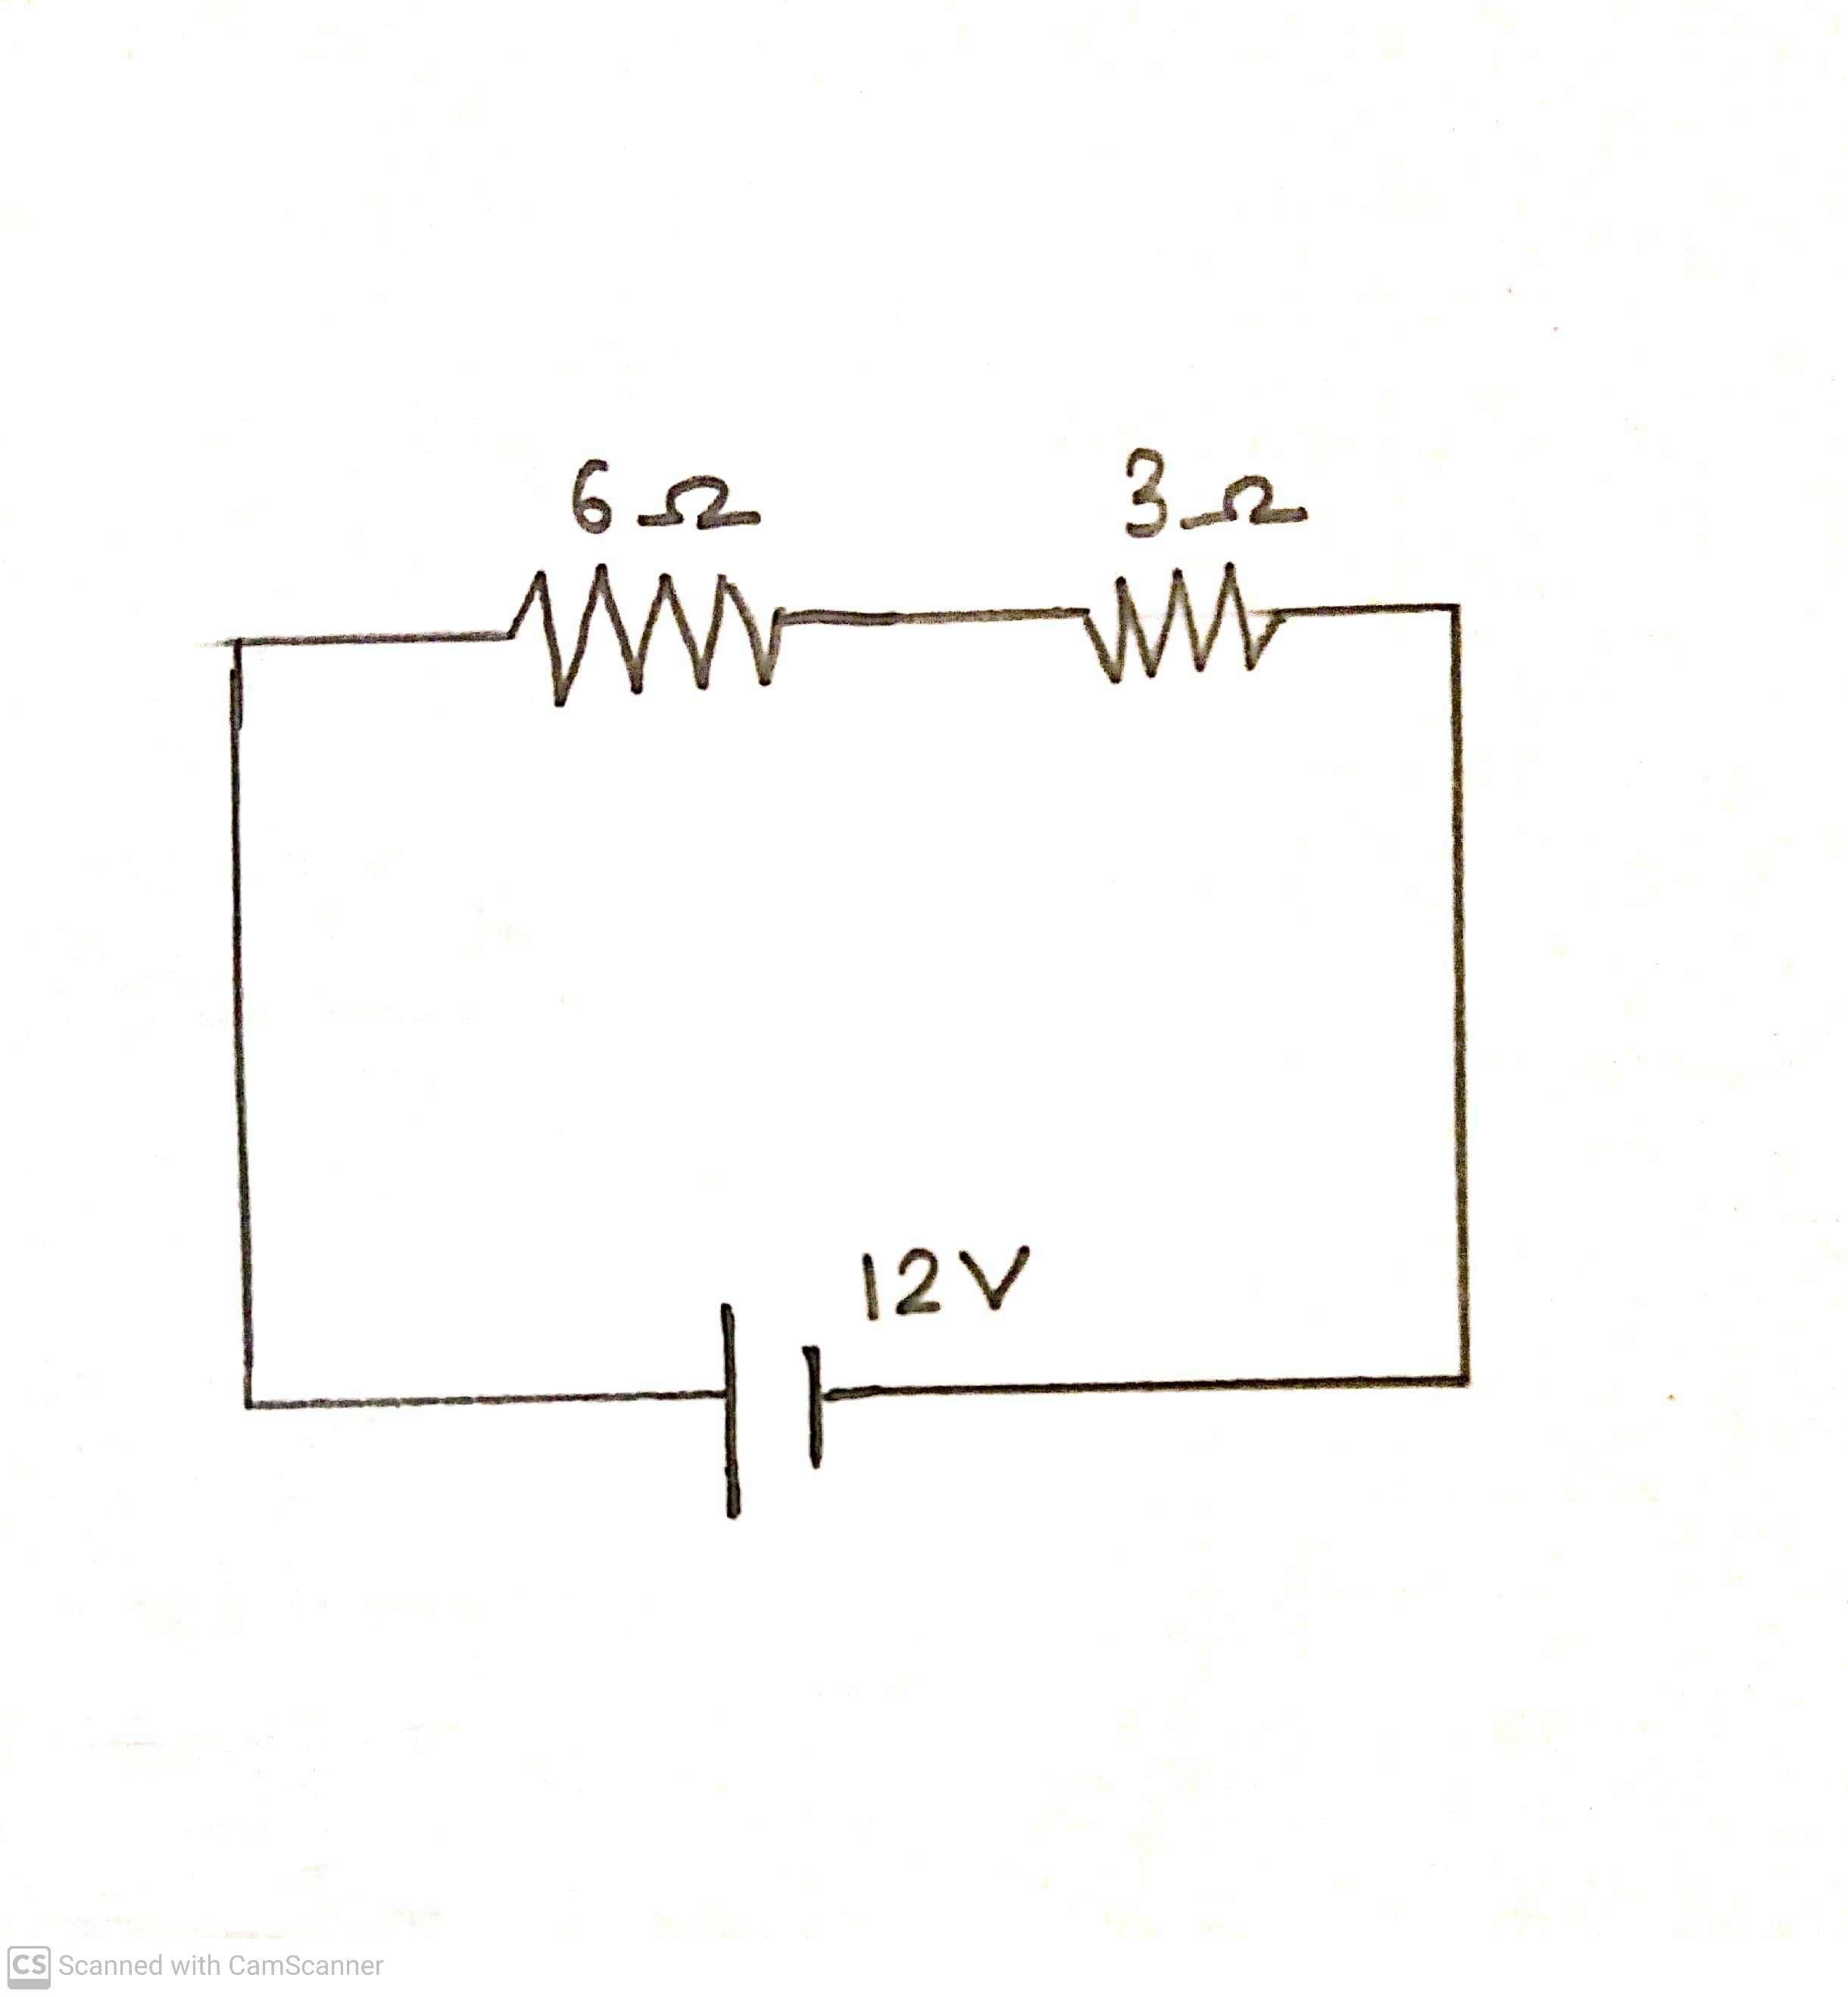 Draw A Circuit Plz A 3 Resistor Is Connected In Series To A 6 Resistor And A 12-V Battery. A. Draw The